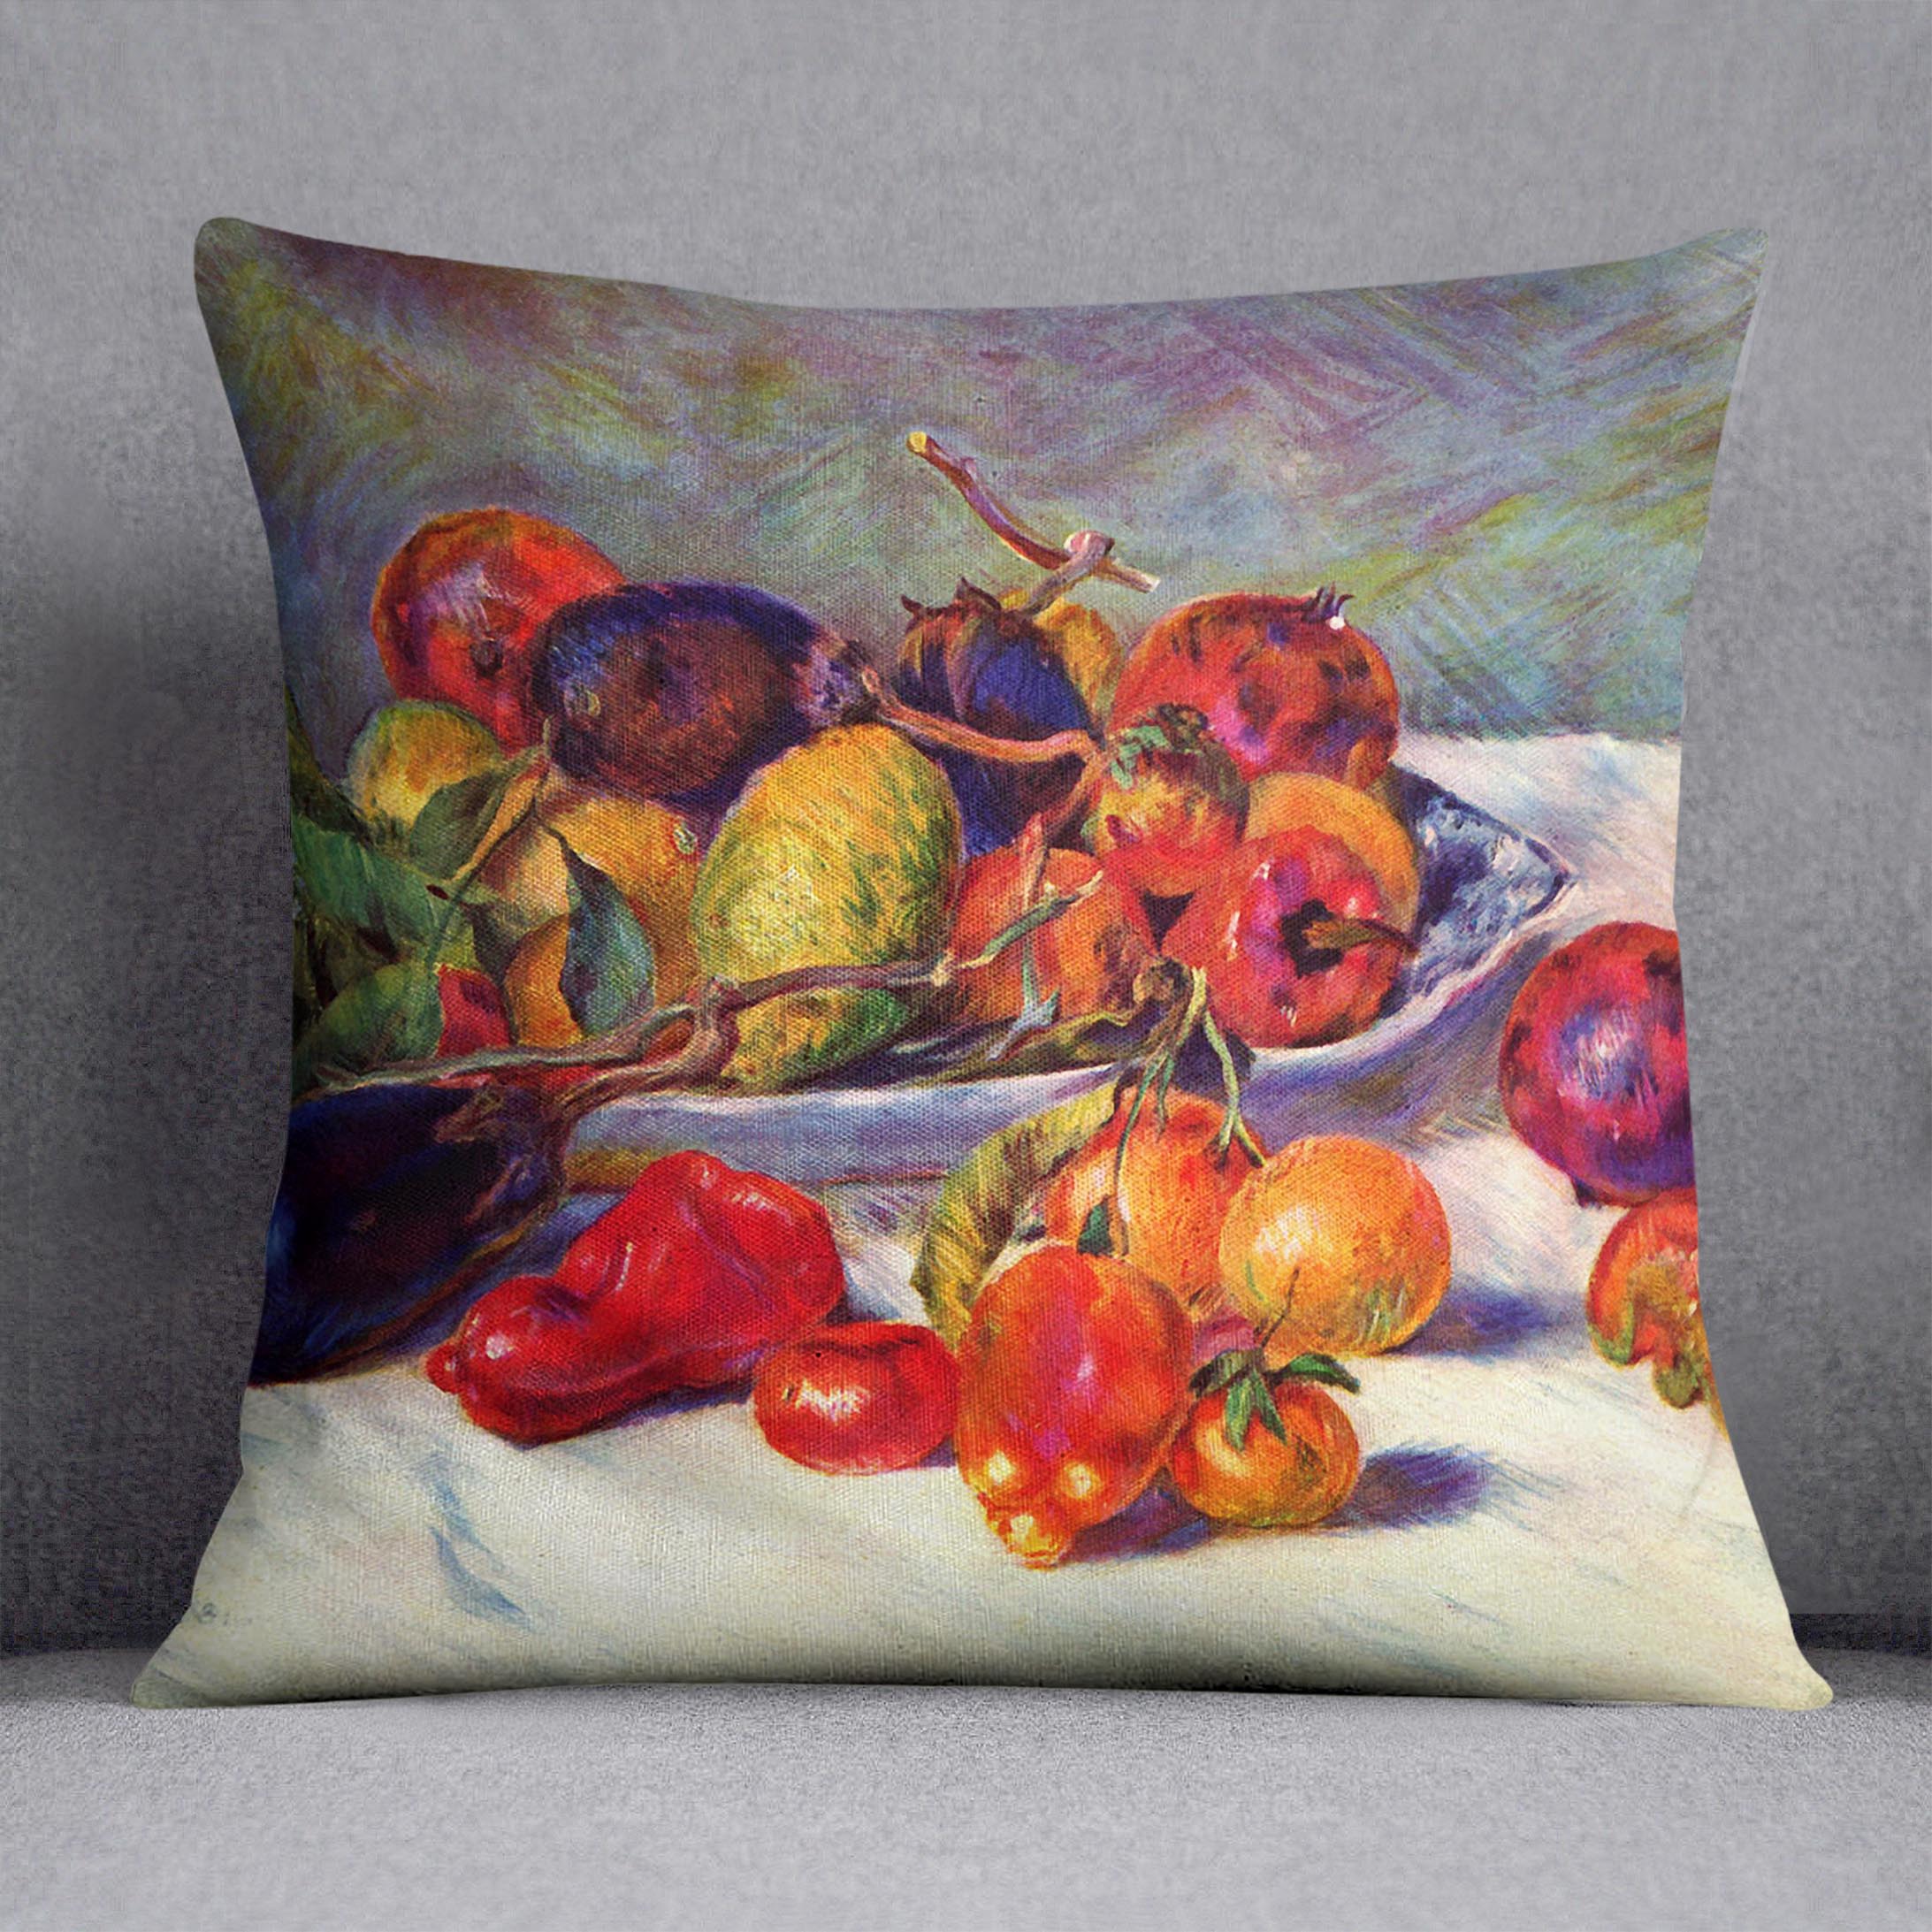 Still life with tropical fruits by Renoir Cushion